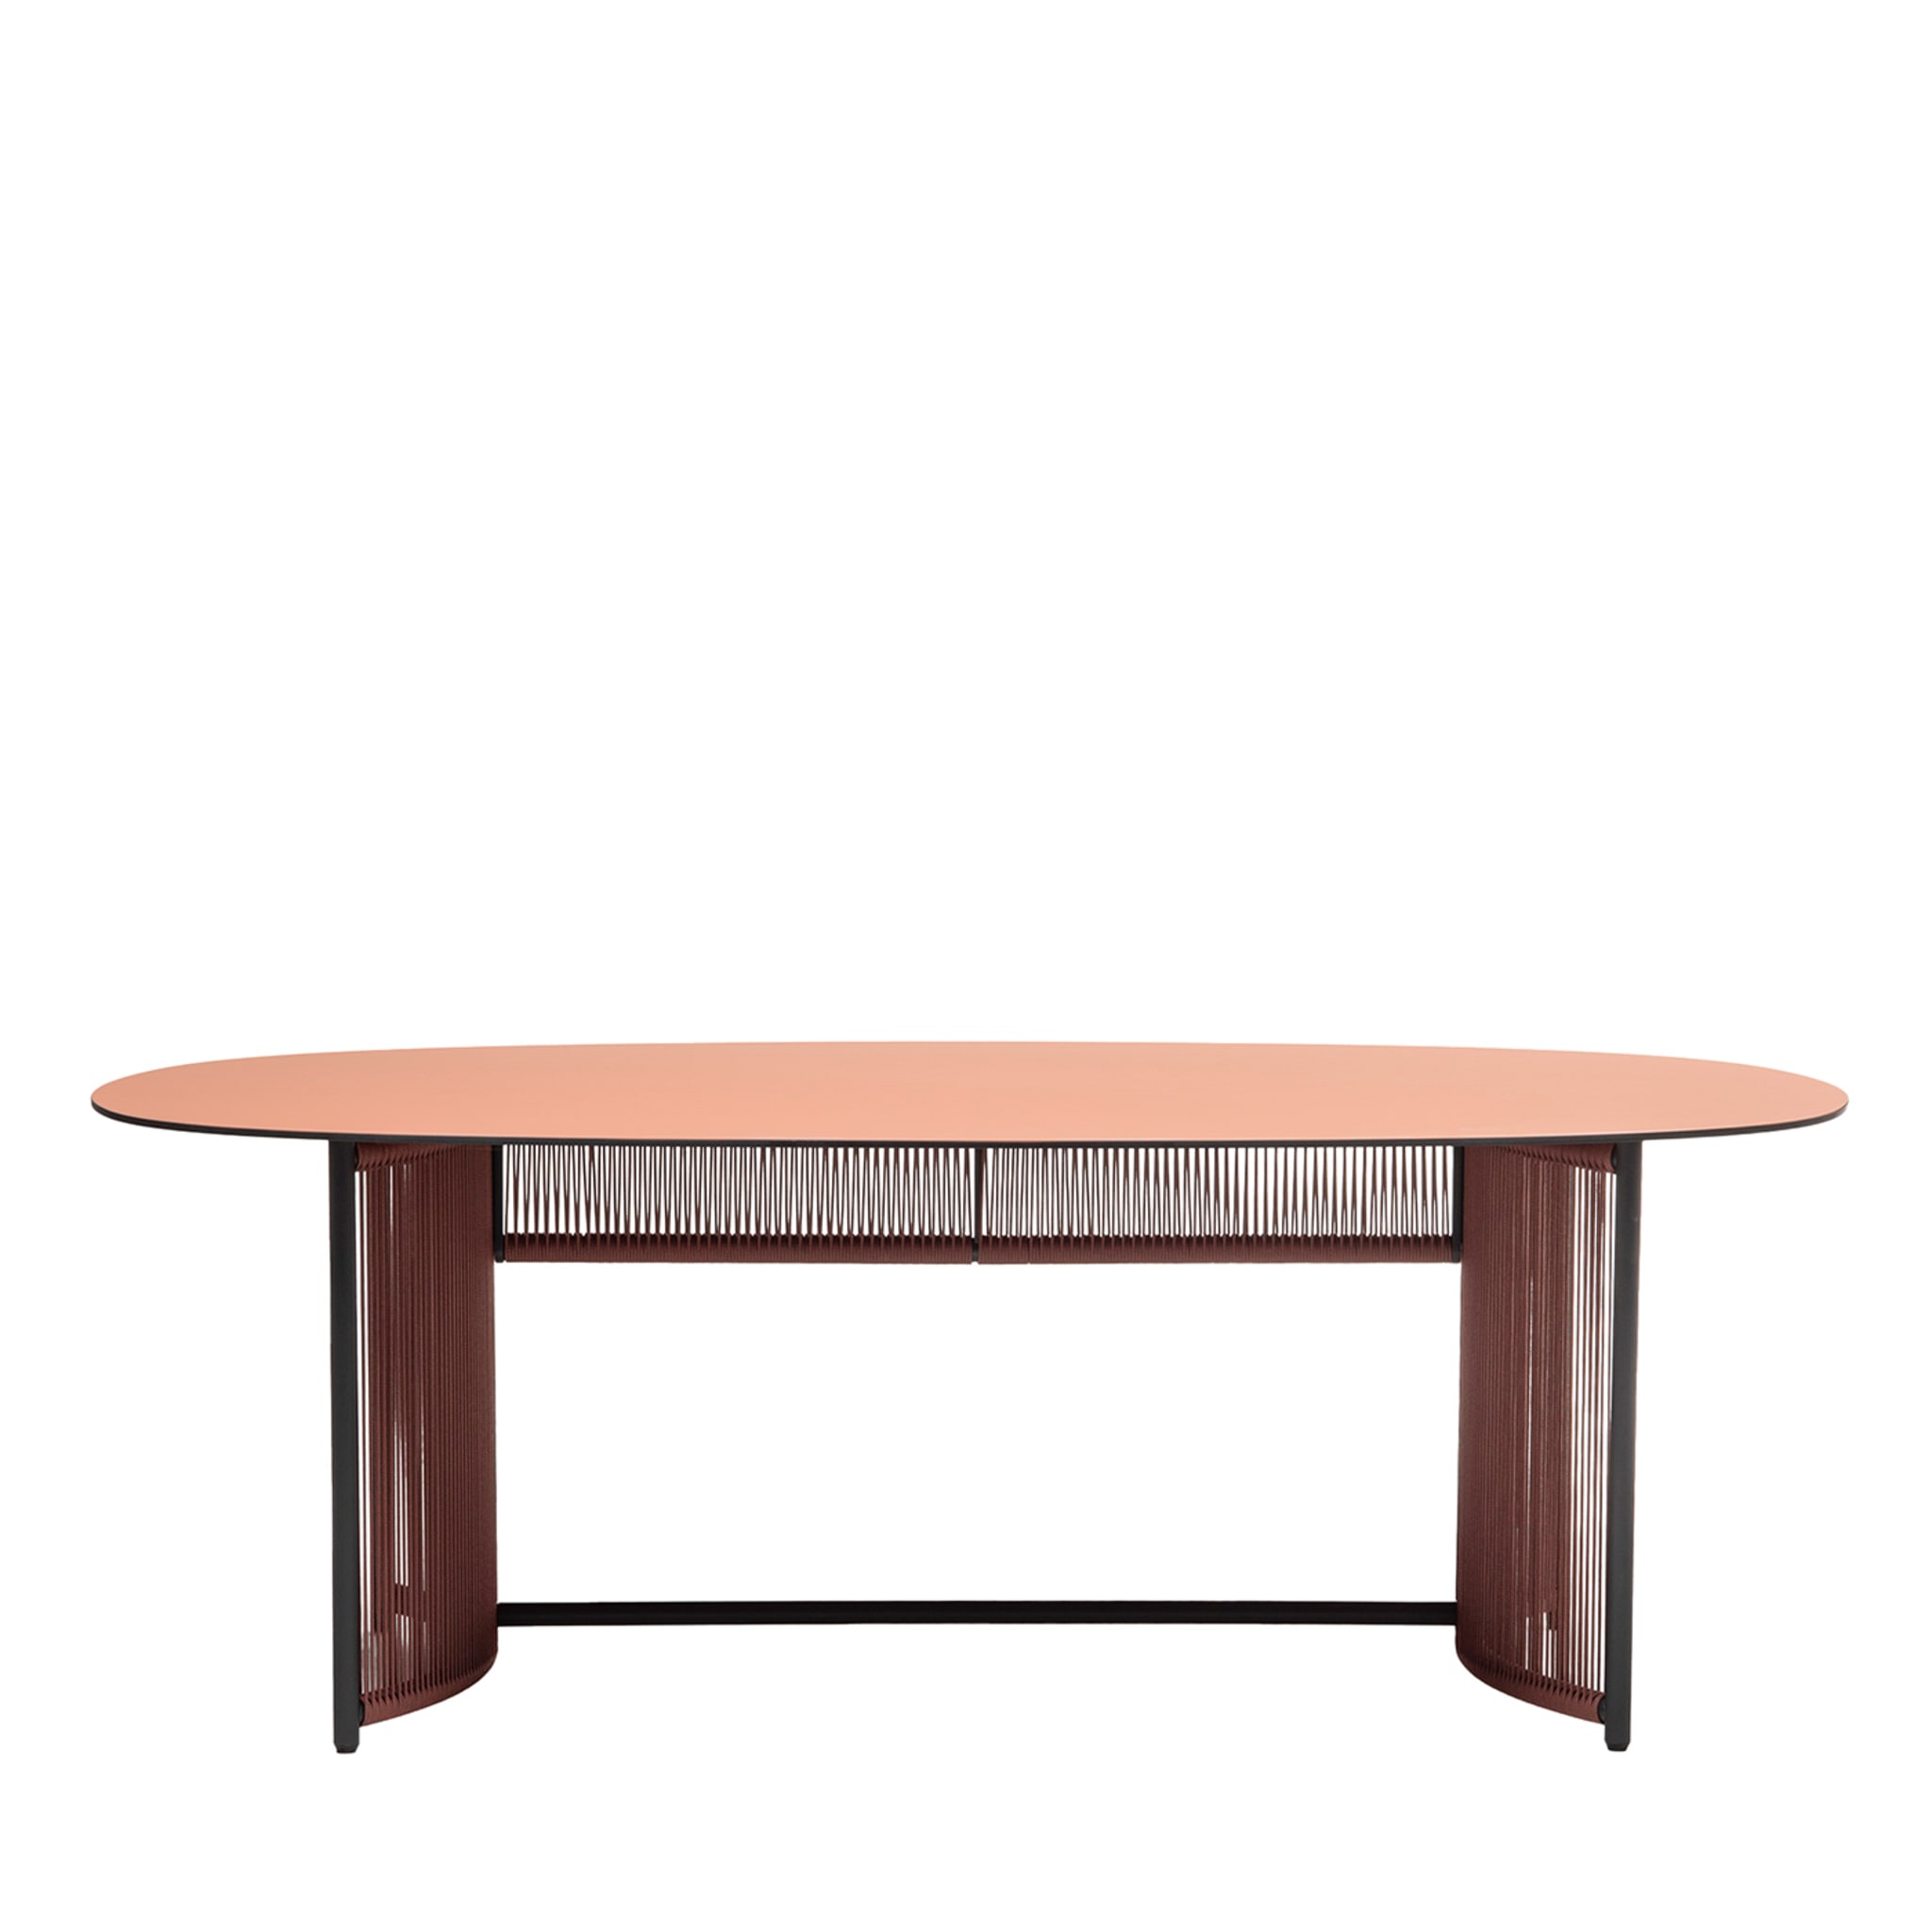 Altana T-OV Oval Brick-Red Table by Antonio De Marco - Main view